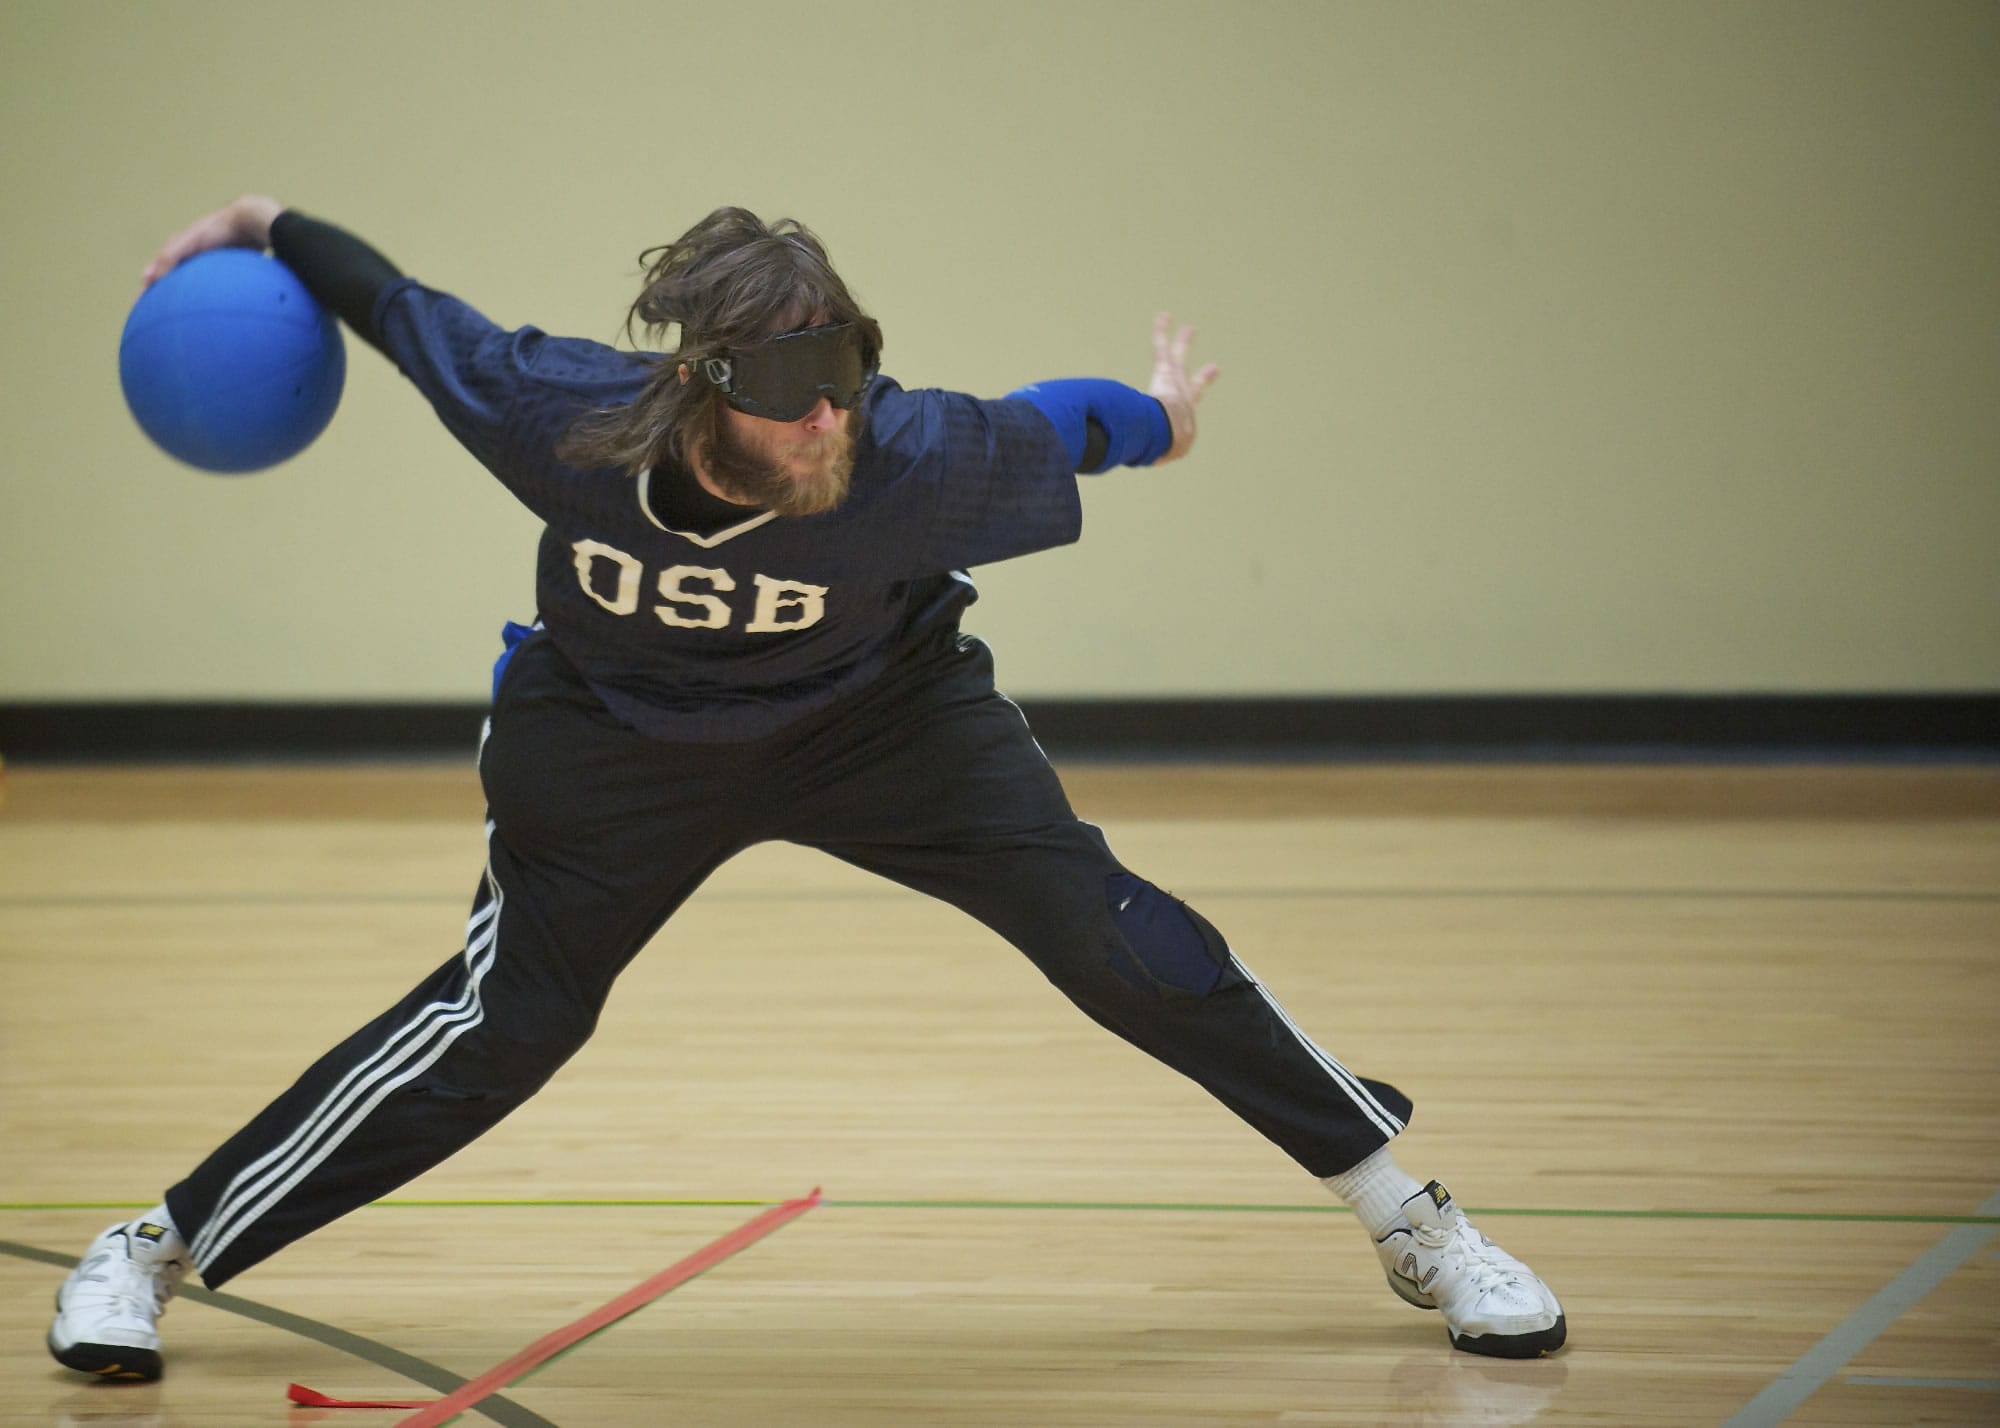 John Hinman, 26, takes a shot as athletes practice for the 2013 National Goalball Championship at the Washington State School for the Blind on Monday.